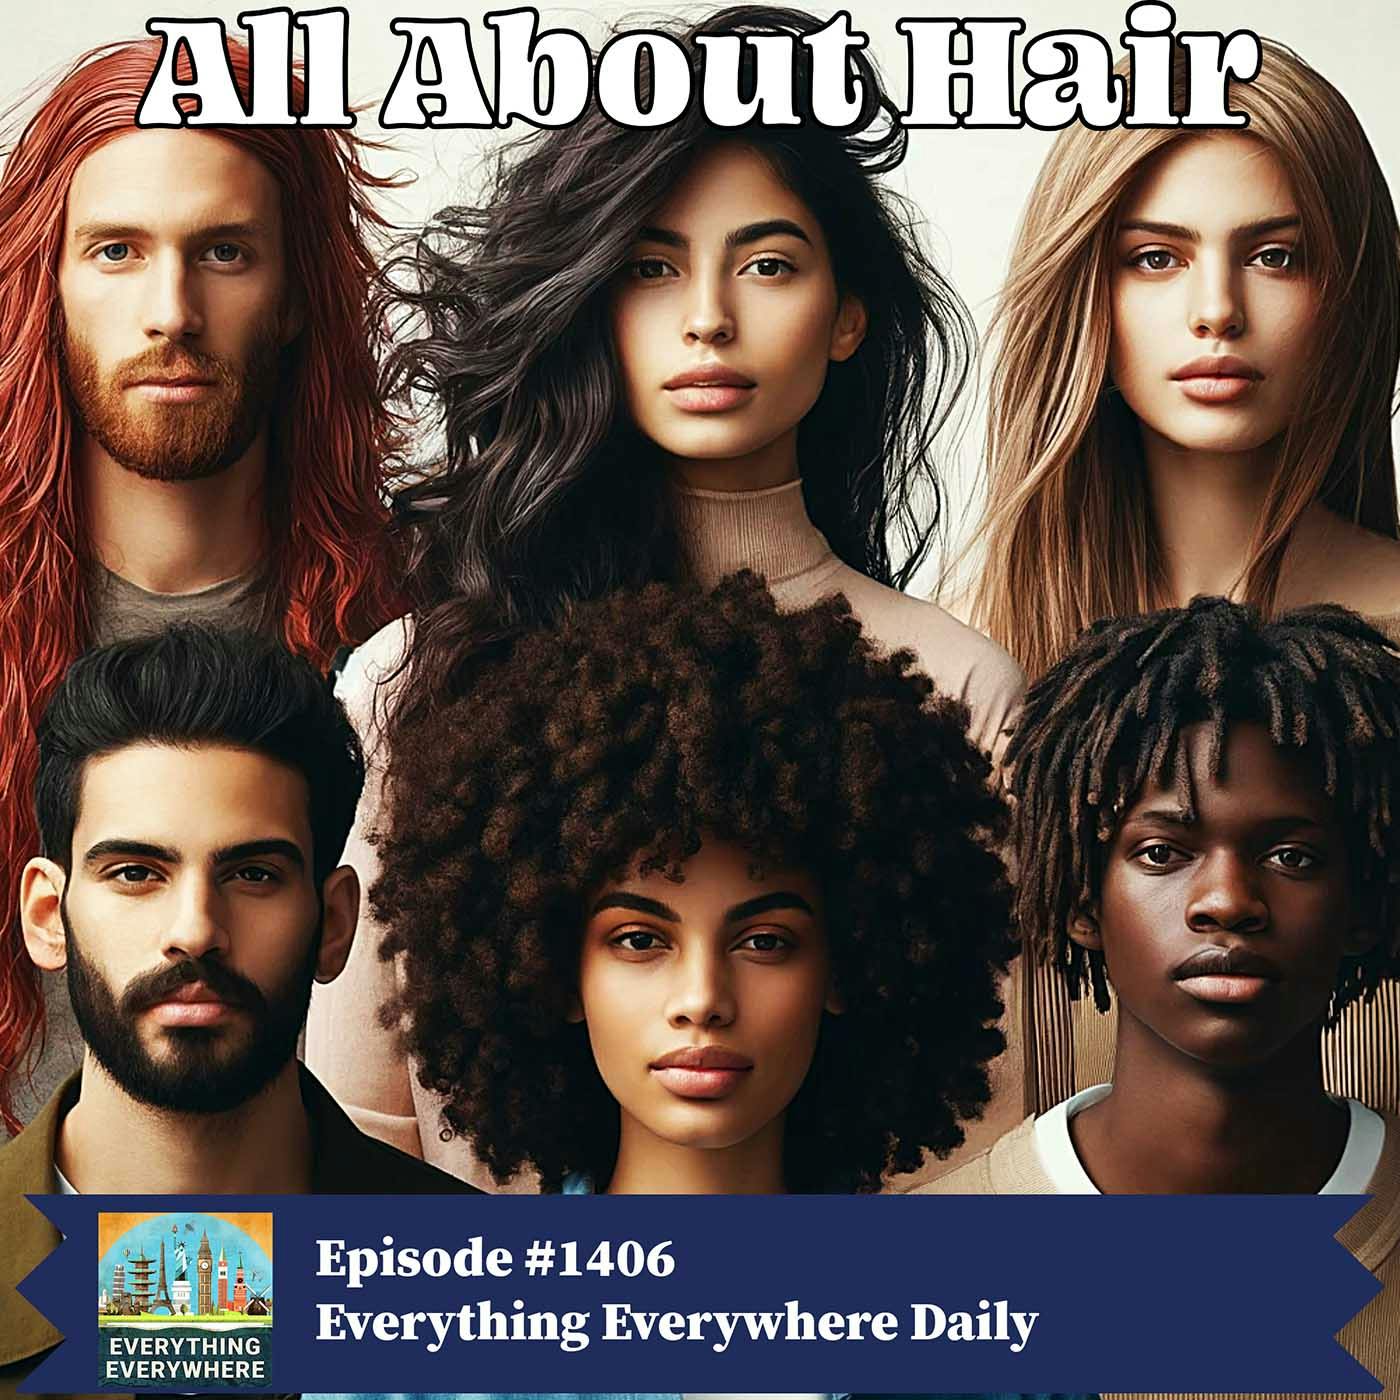 All About Hair